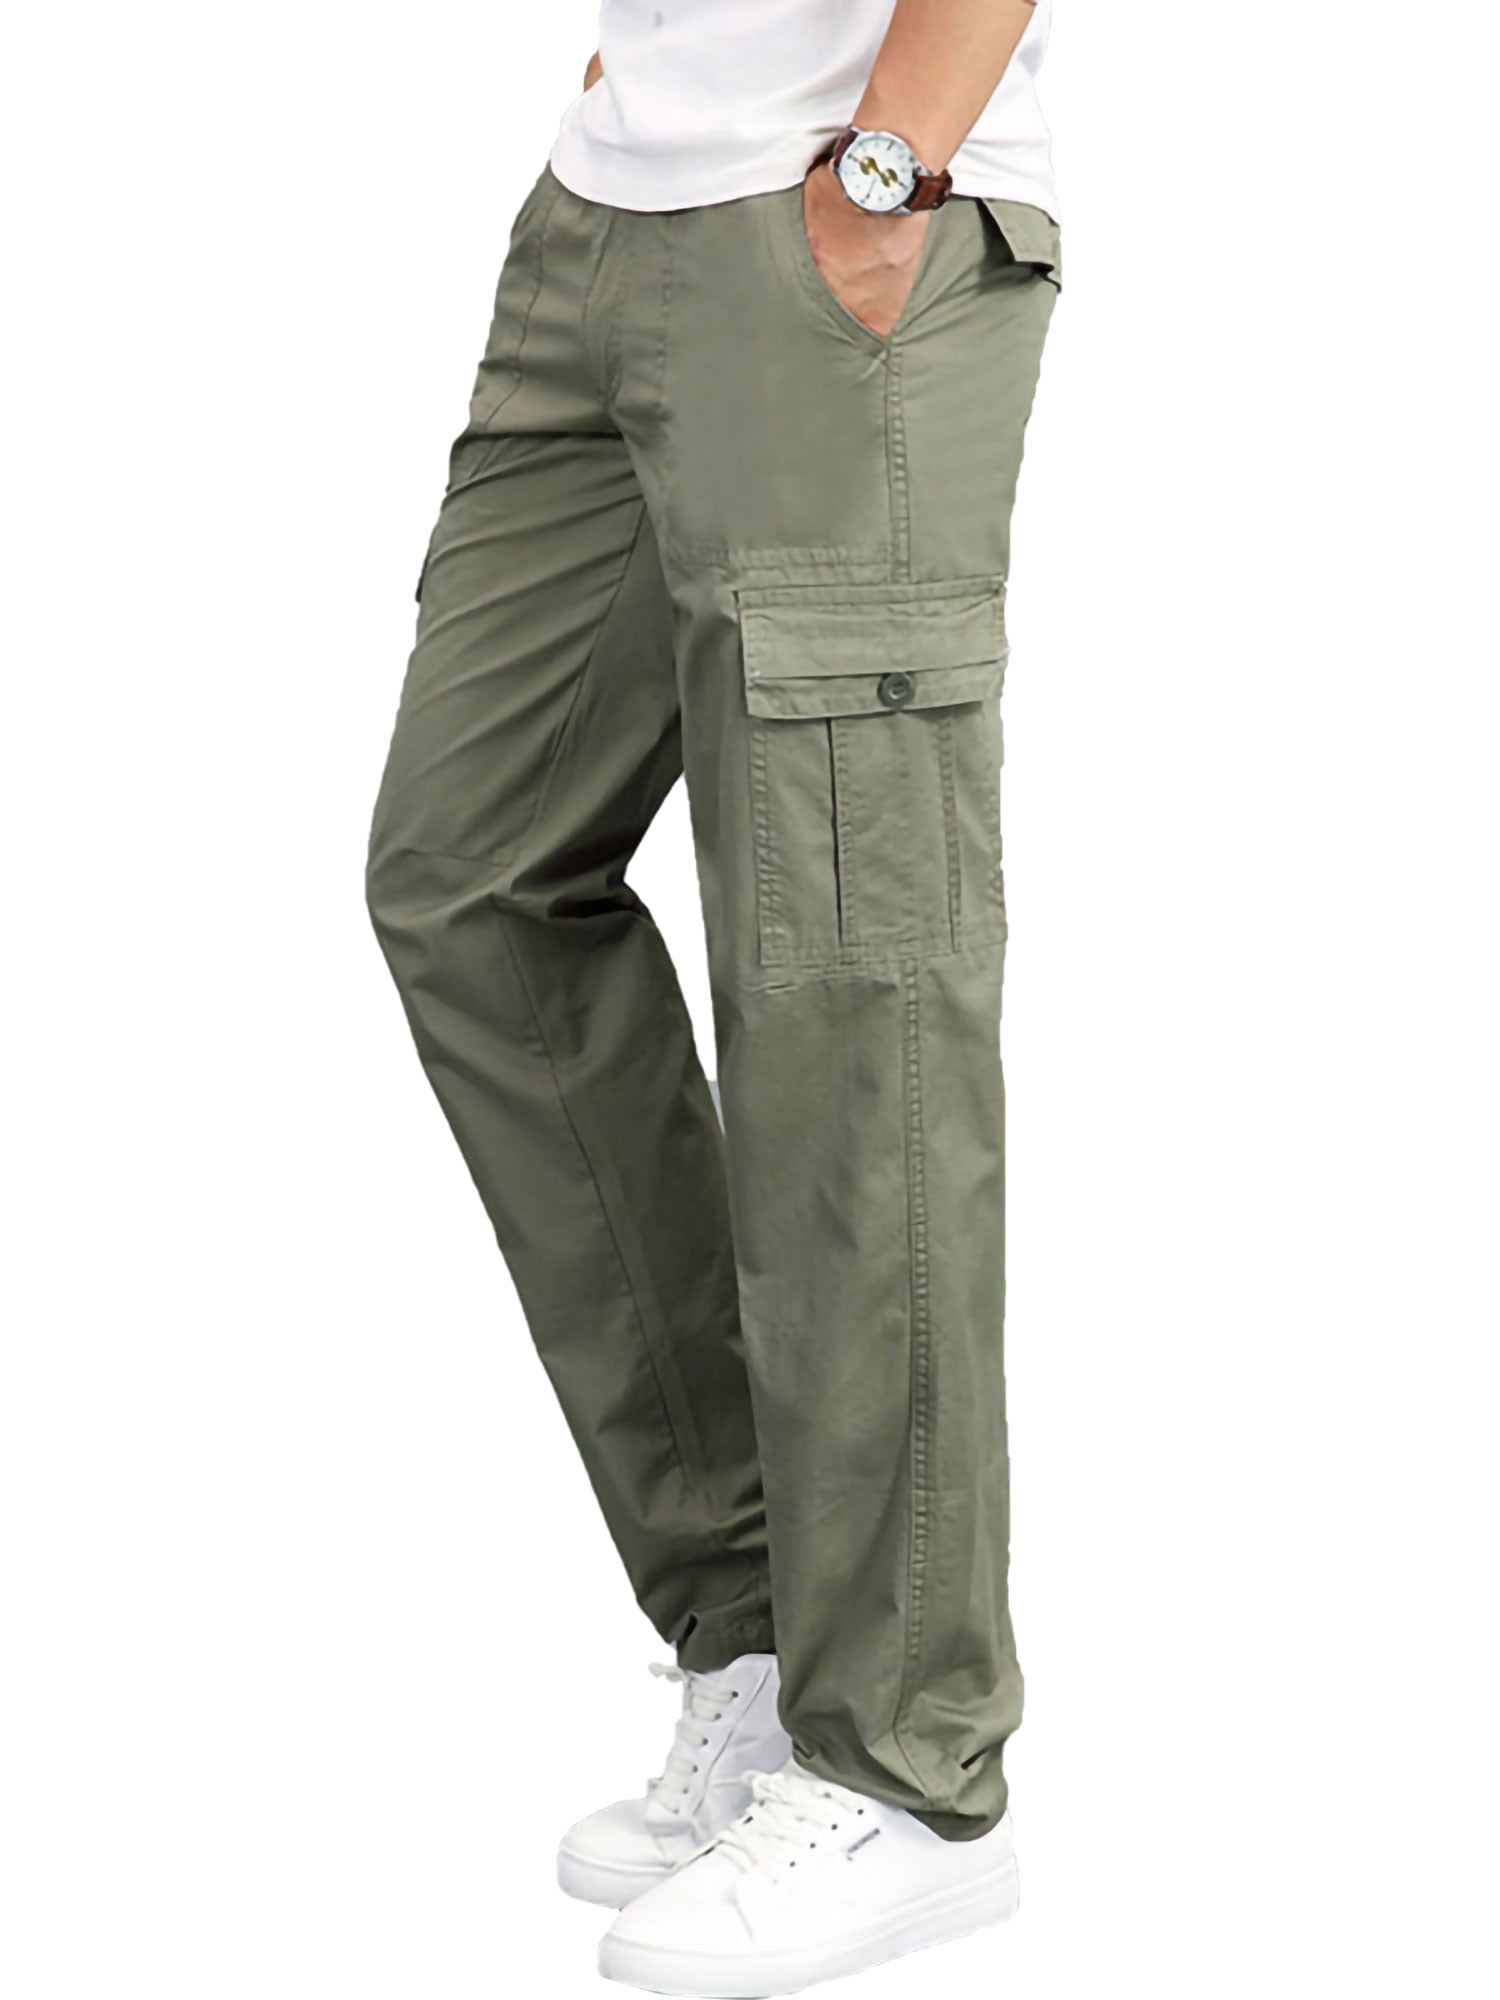 Men Outdoor Slim Fit Shell Thermal Casual Trousers Combat Work Wear Pants Bottom 